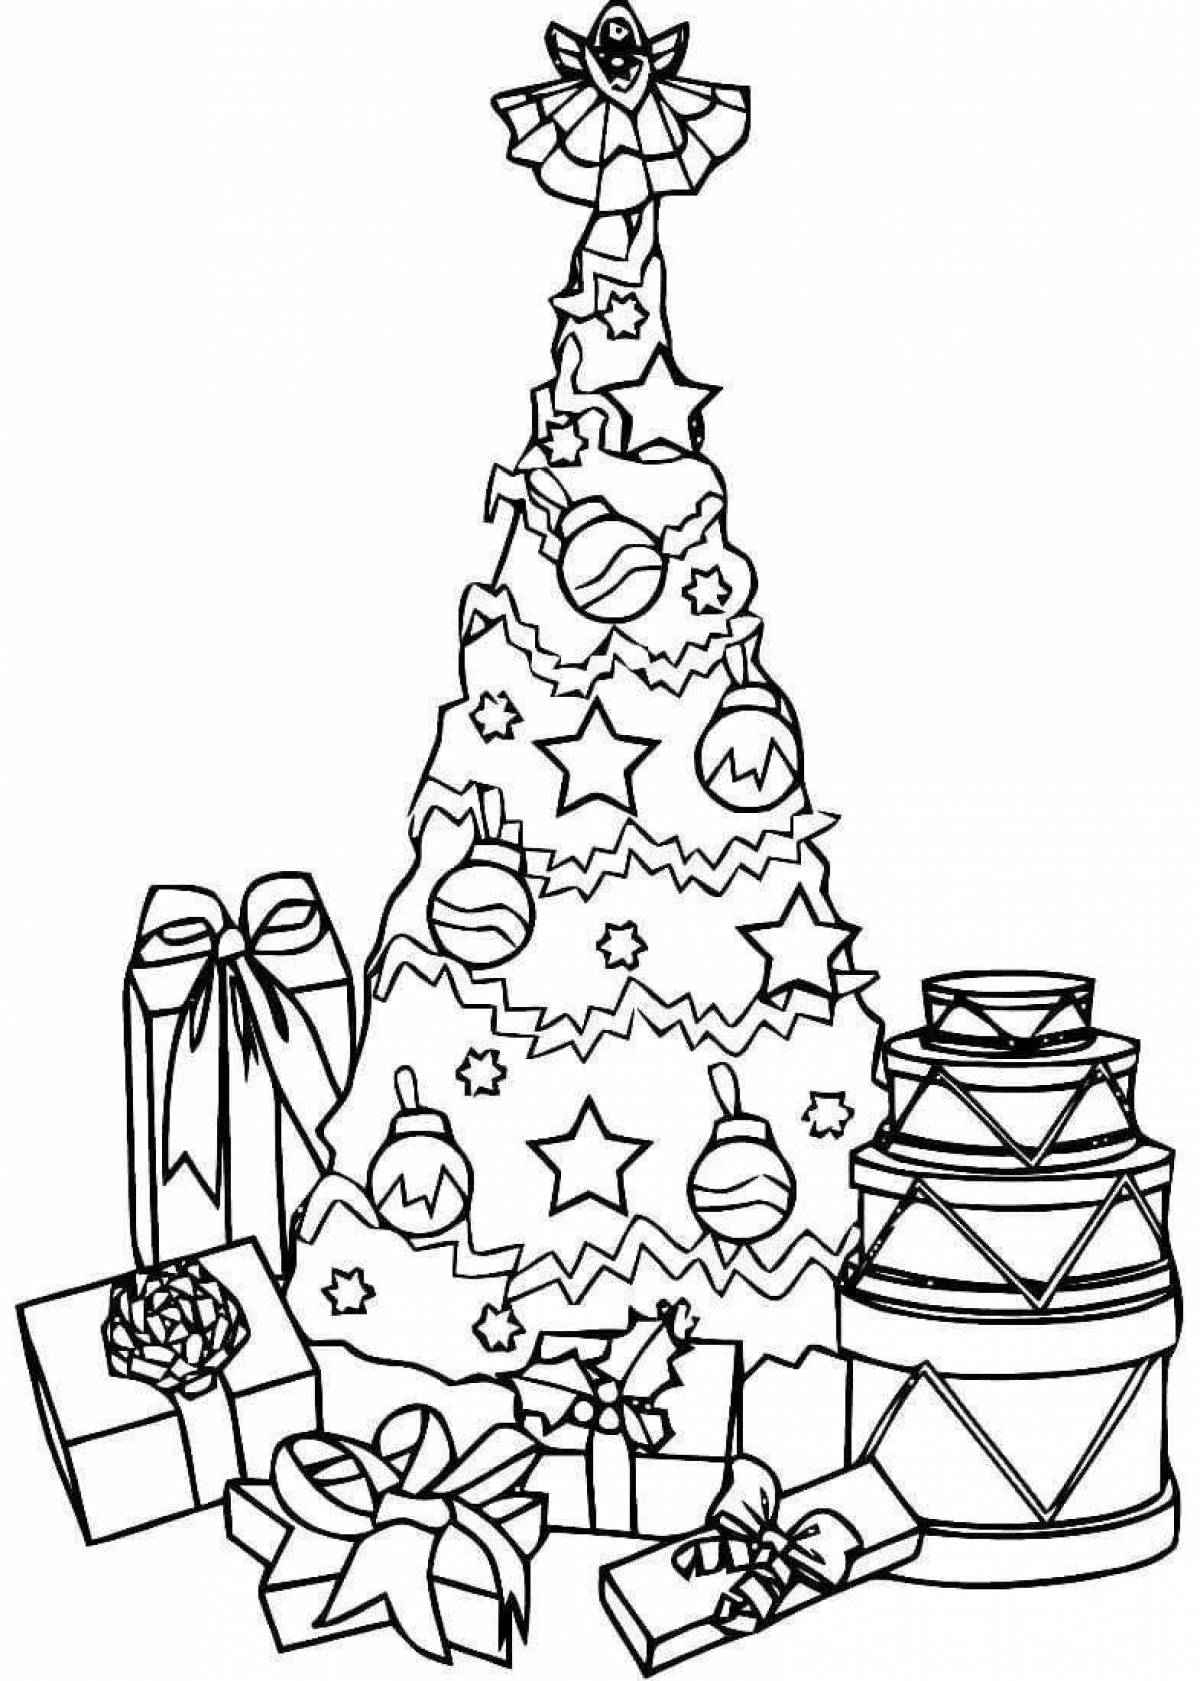 Bright Christmas tree with gifts for children